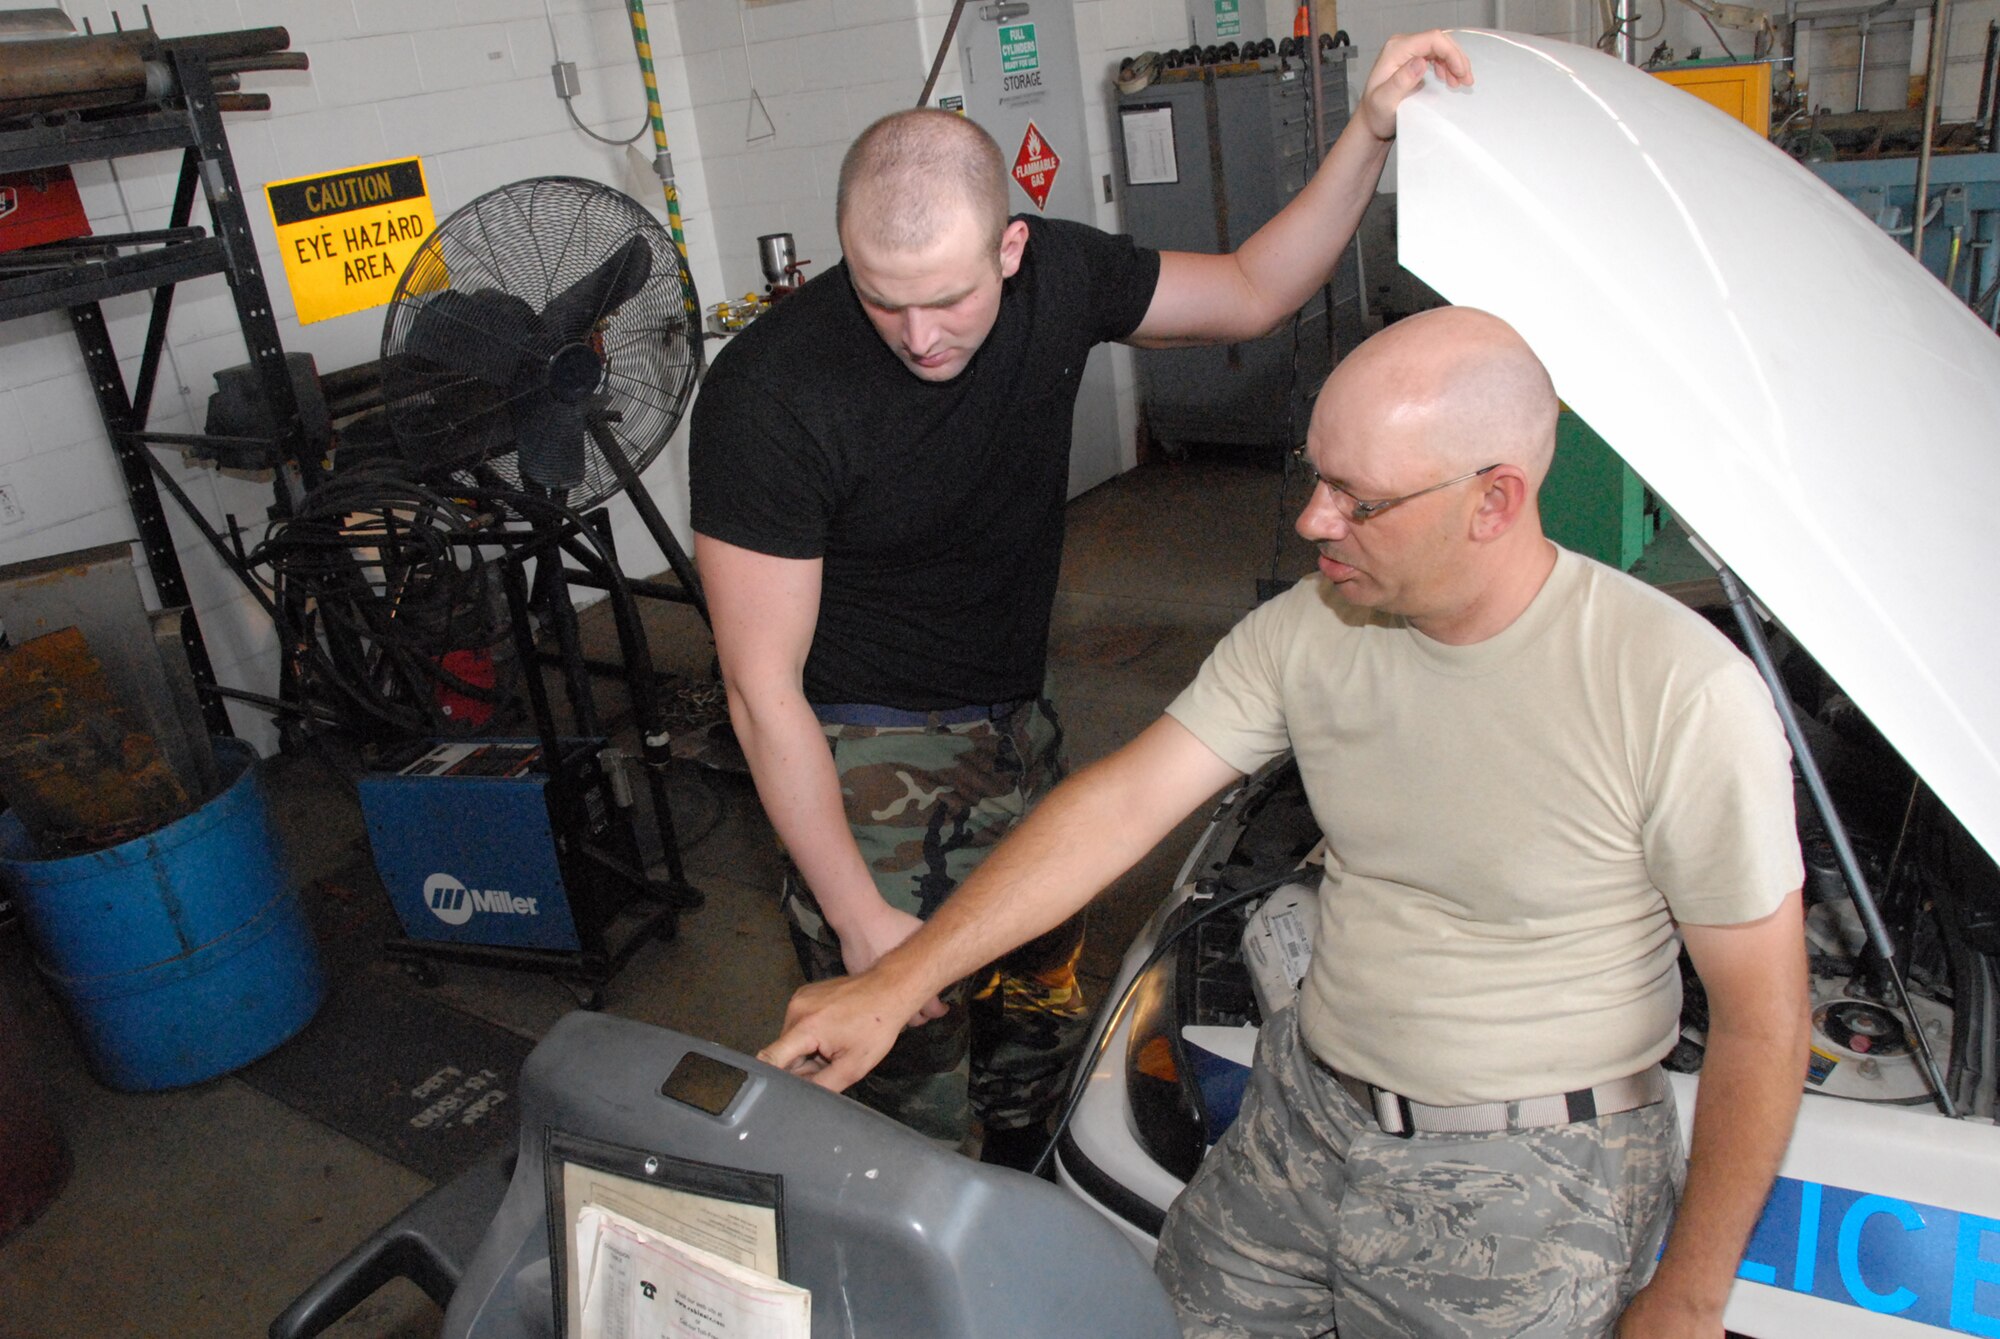 Staff Sgt. Andrew Carrender and Tech. Sgt. David Arnold, vehicle mechanics with the 442nd Logistics Readiness Squadron, monitor a diagnostic computer hooked up to a car they are repairing. The 442nd LRS is a part of the 442nd Fighter Wing, an Air Force Reserve Command A-10, Thunderbolt II, fighter unit based at Whiteman Air Force Base, Mo. (US Air Force photo/MSgt. Bill Huntington)